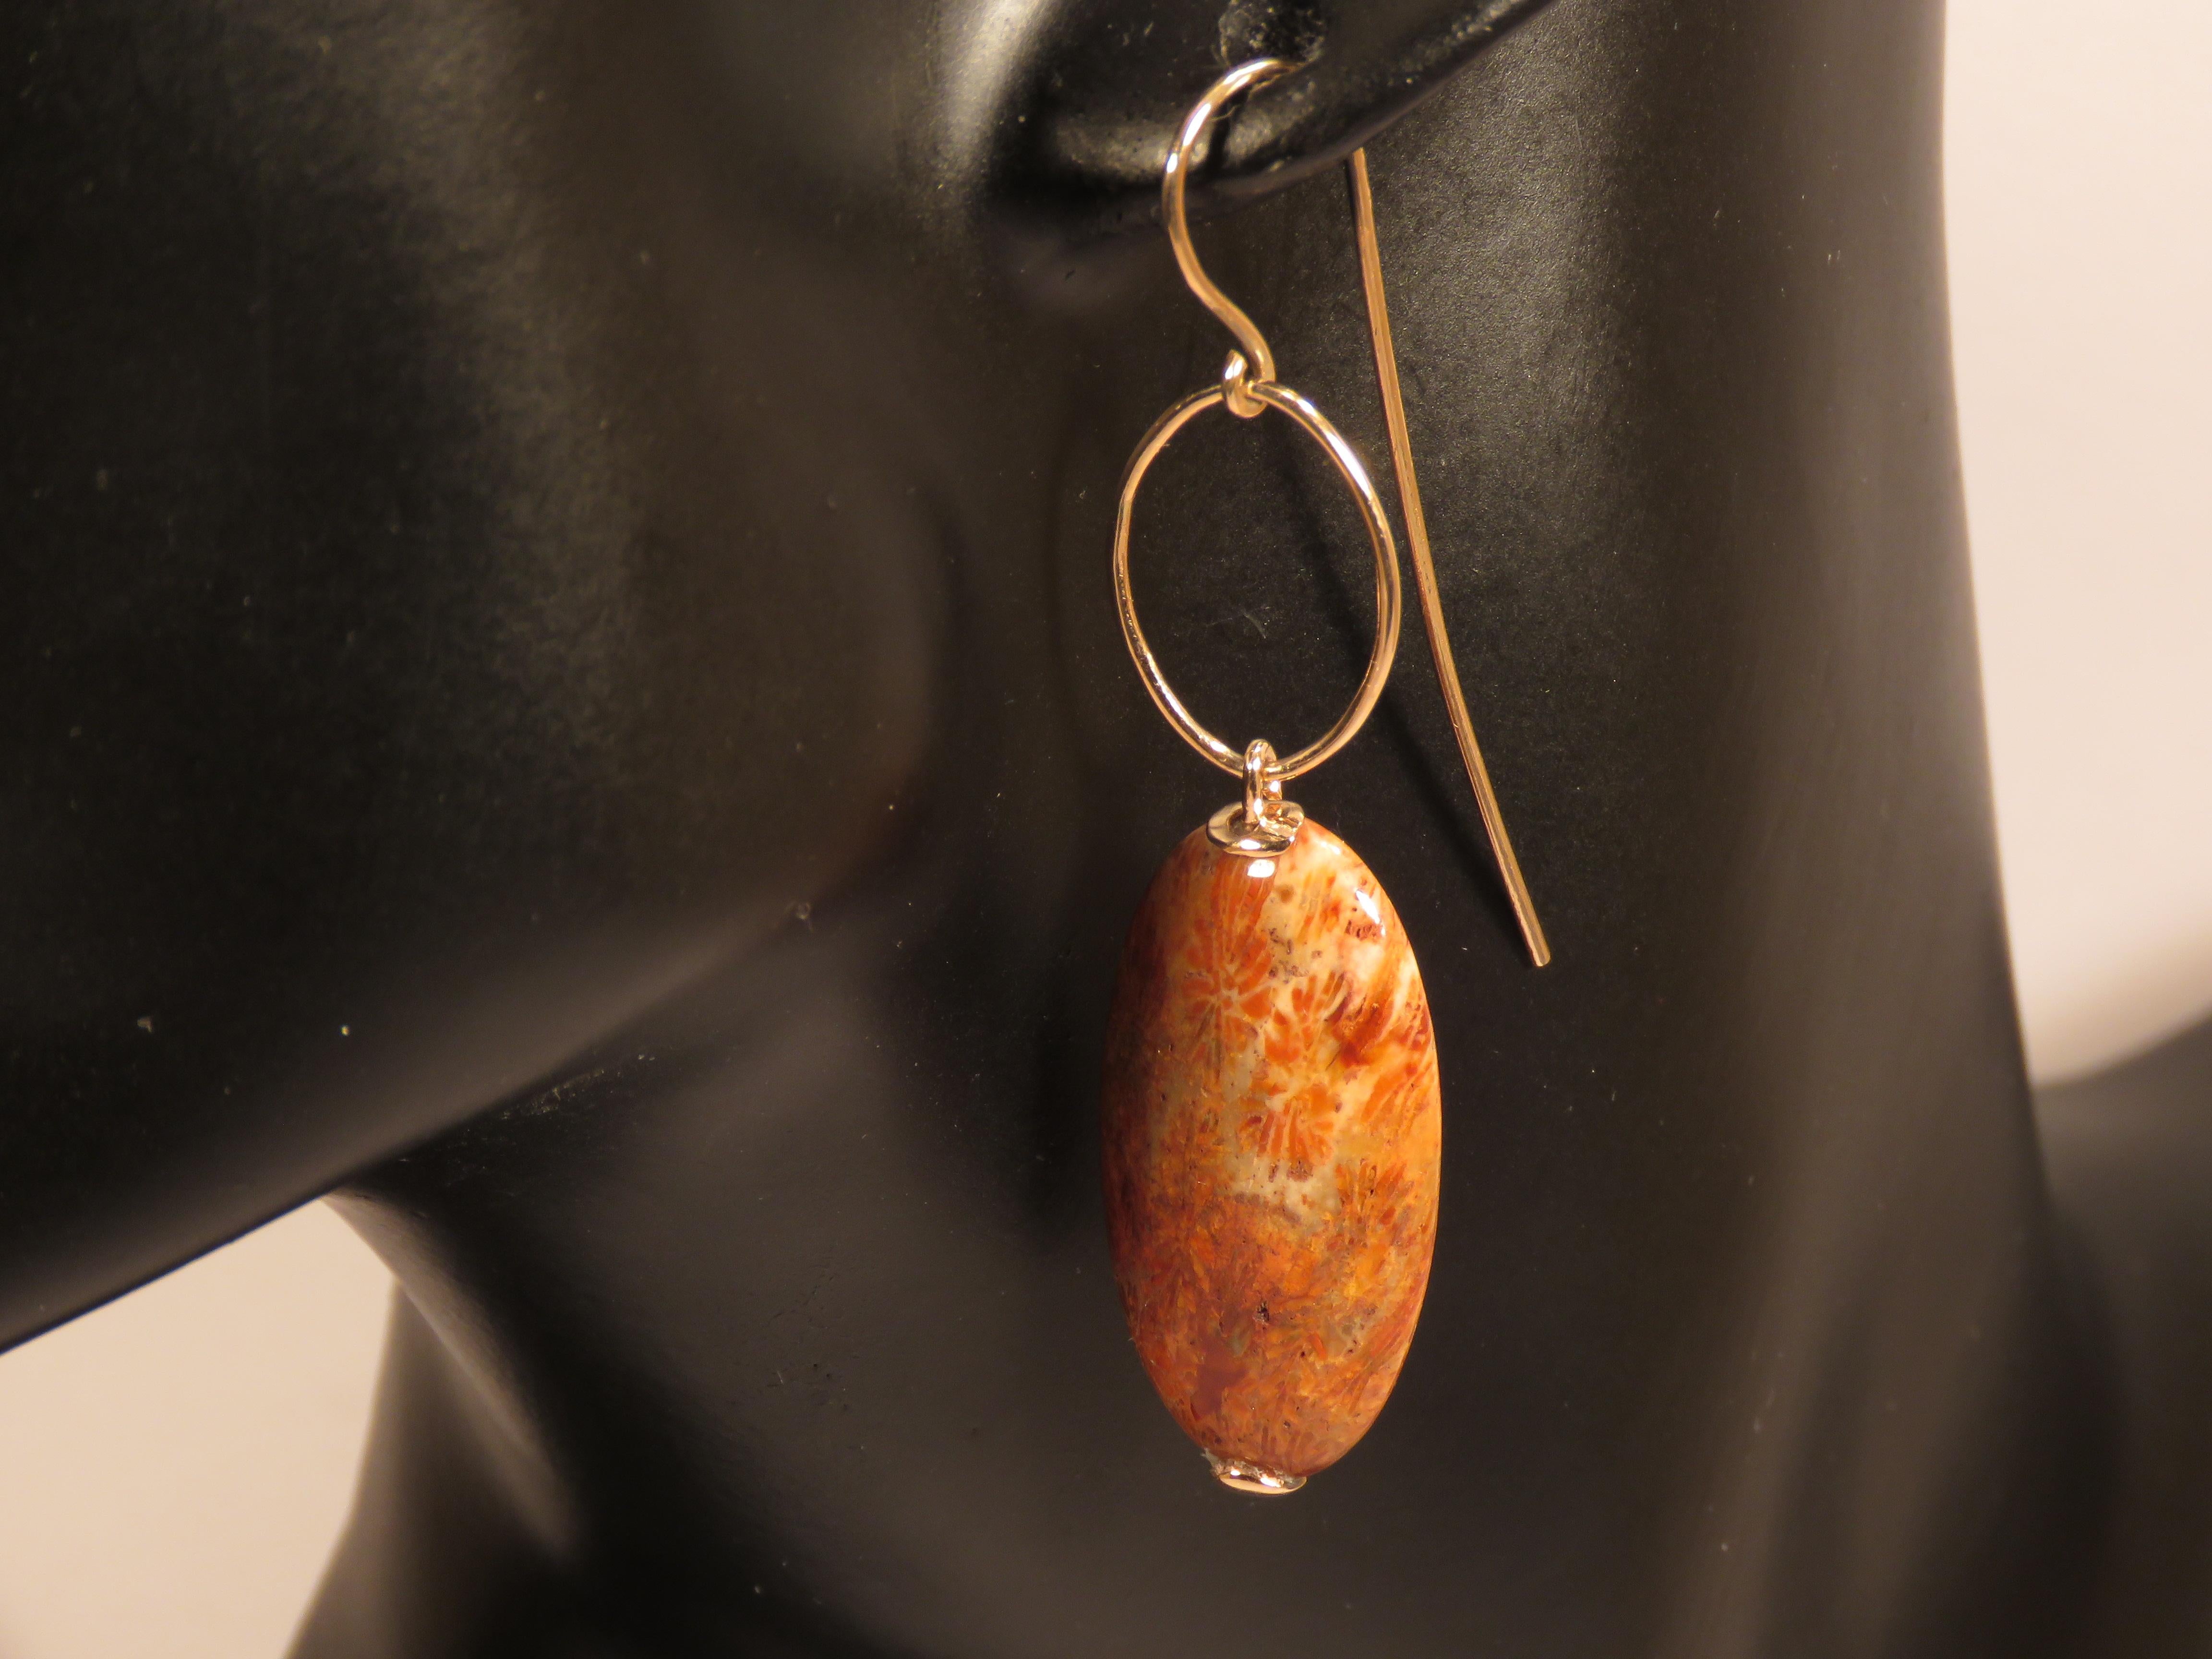 Cabochon Dendritic Agate Rose Gold Earrings Handcrafted in Italy by Botta Gioielli